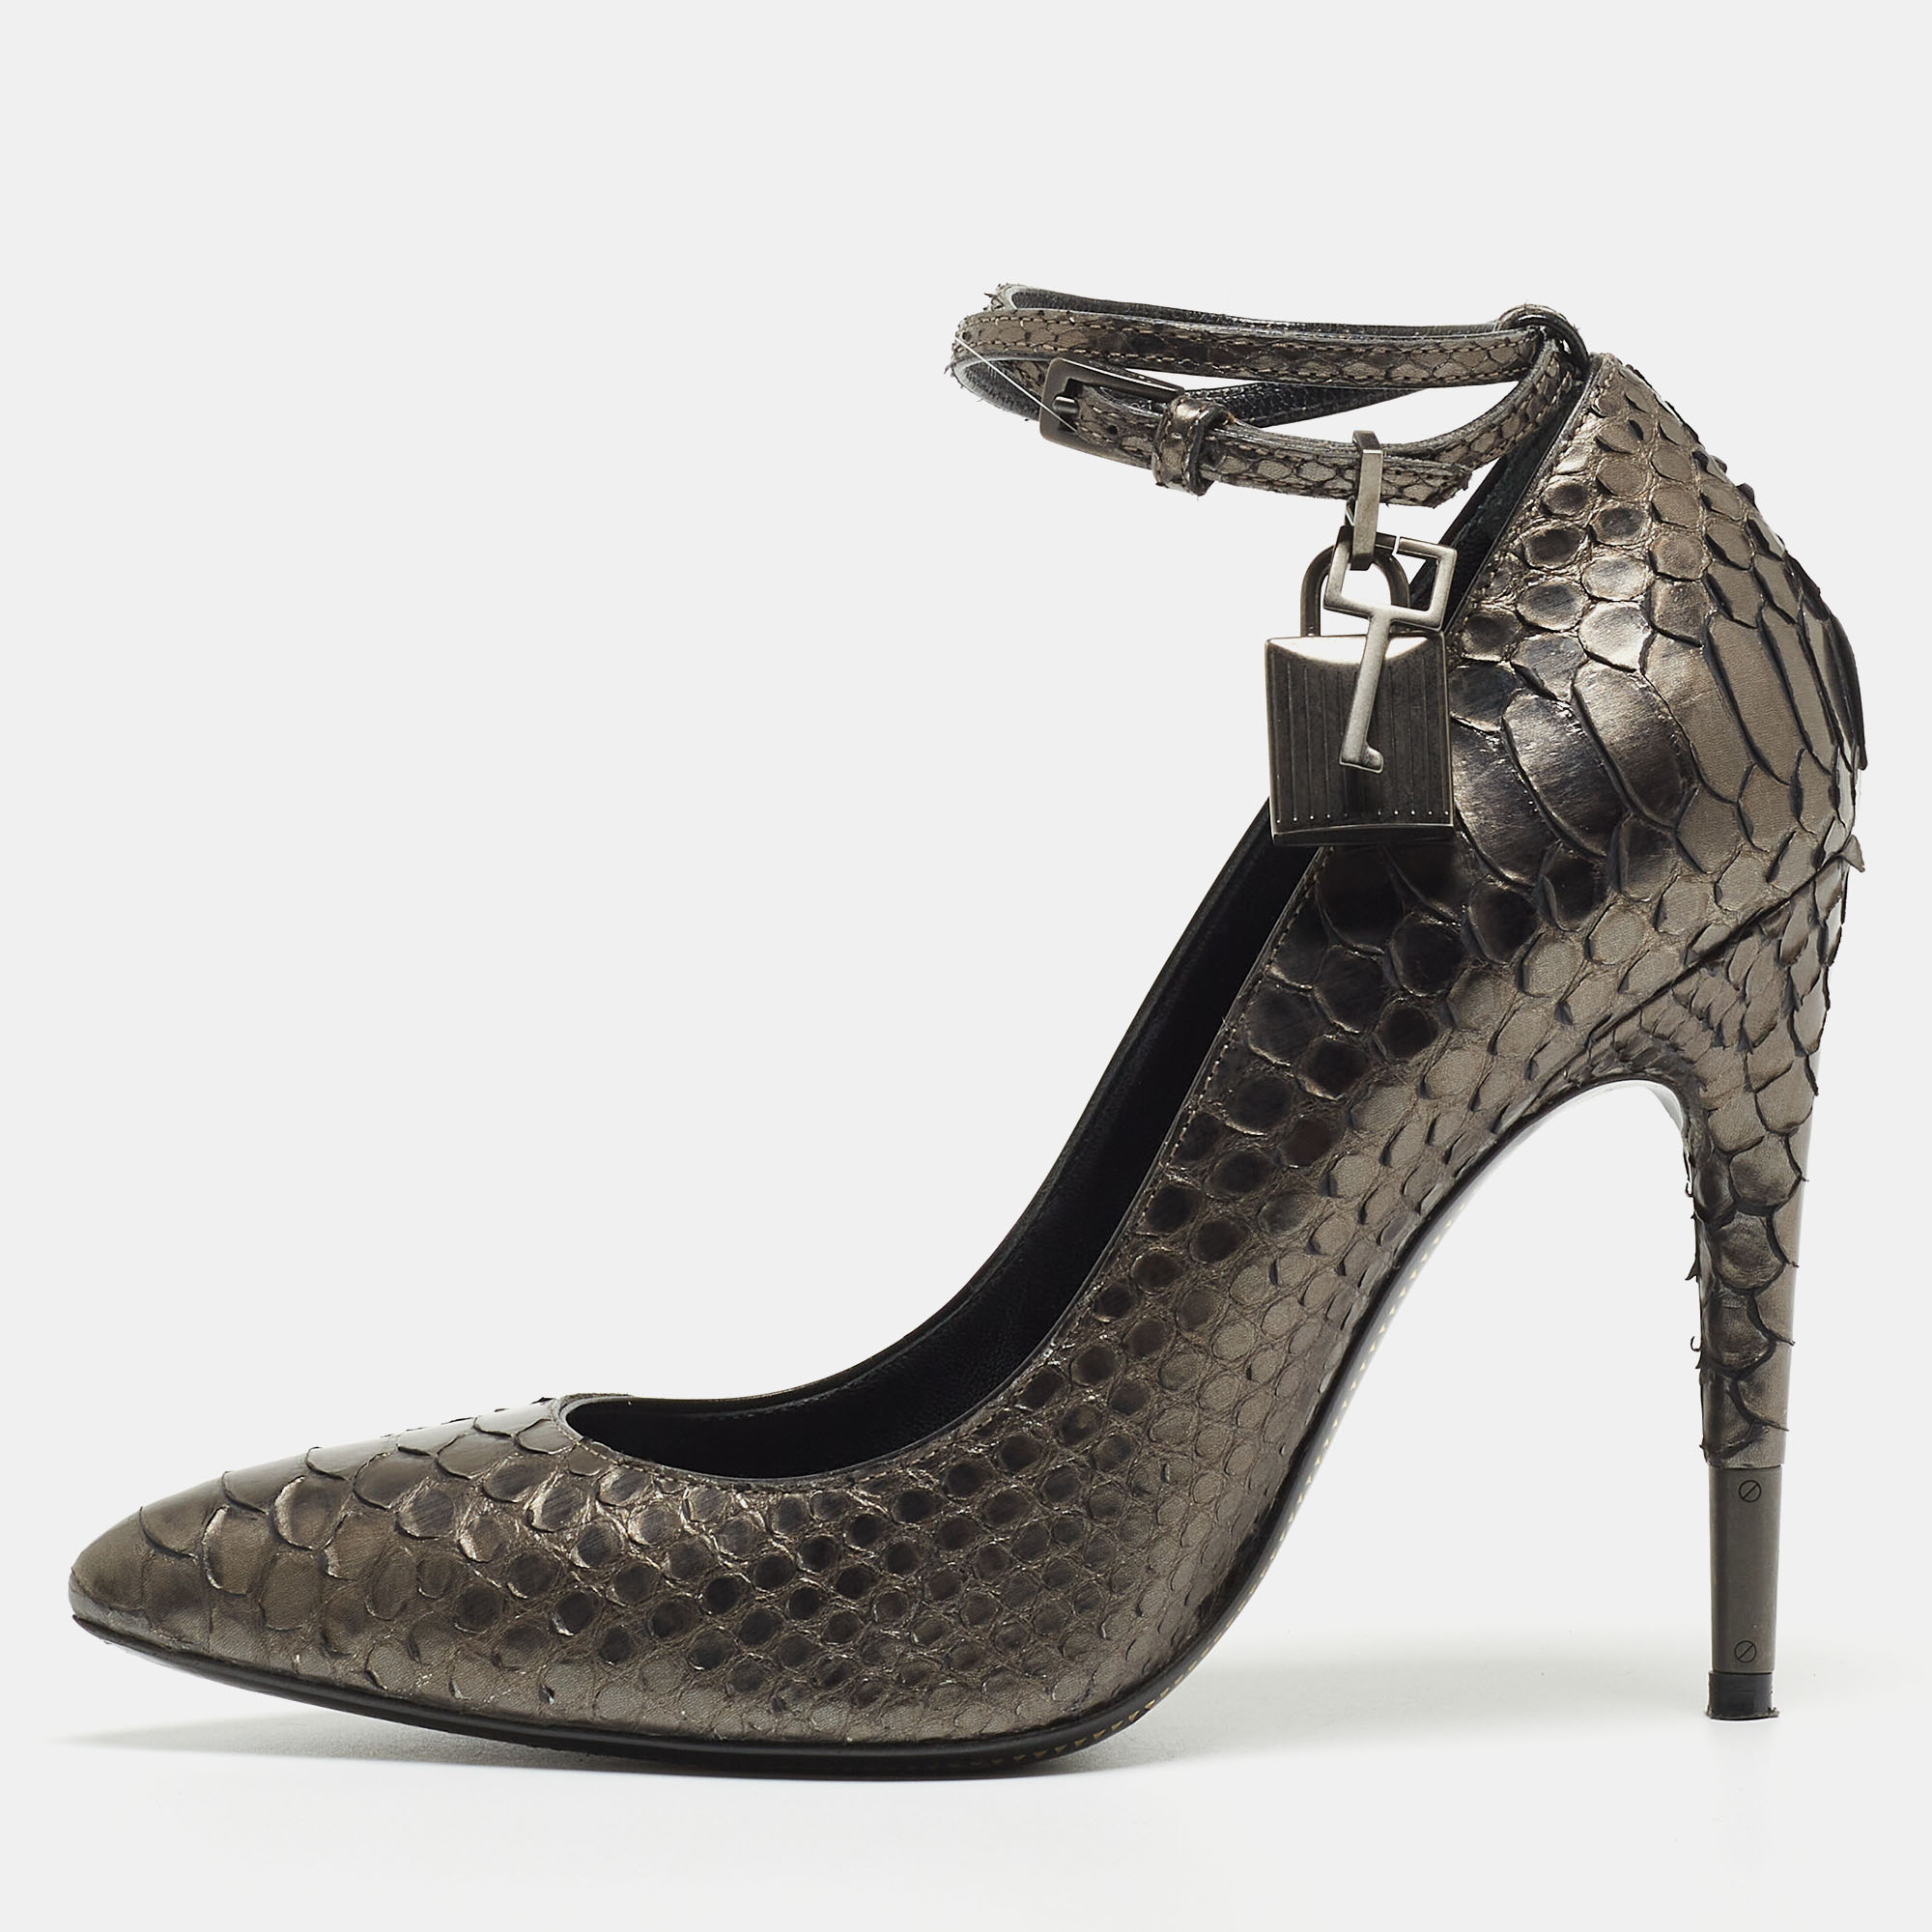 Pre-owned Tom Ford Grey Metallic Python Padlock Ankle Wrap Pumps Size 36.5